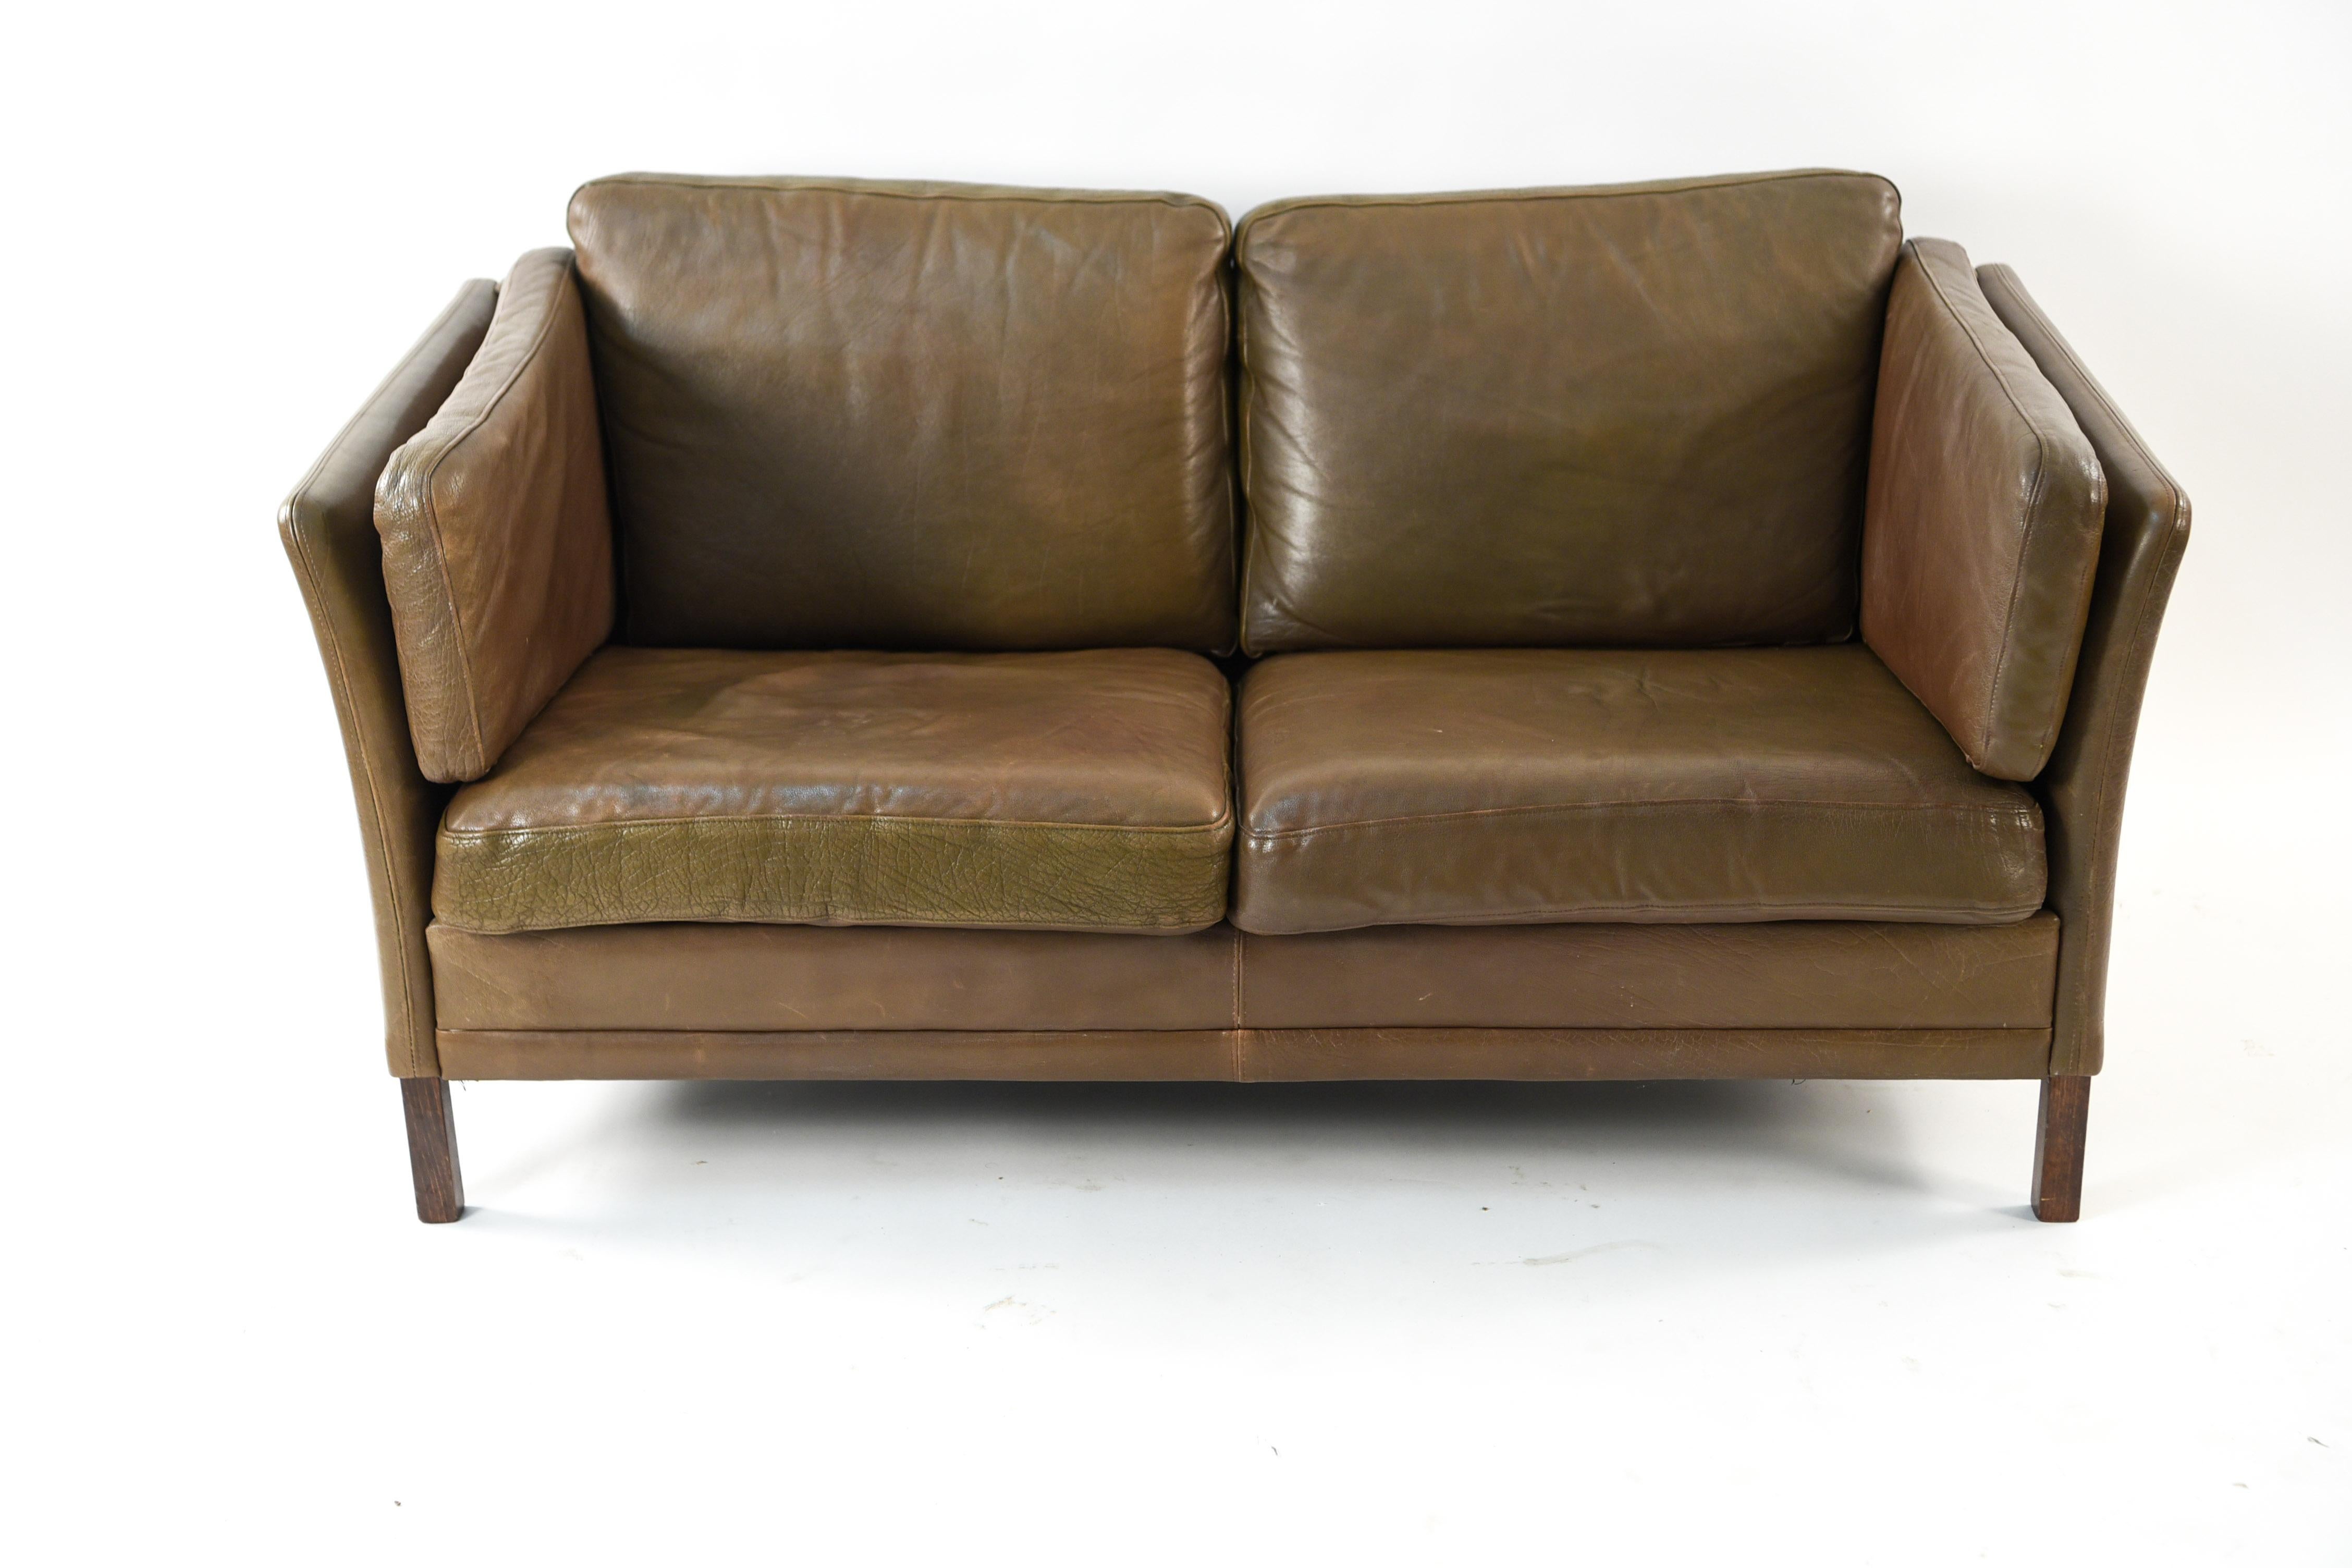 This loveseat is in the manner of designer Borge Mogensen and was manufactured by Mogens Hansen, circa 1970s. Upholstered in analine buffalo hide which has acquired an attractive, desirable patination from time and use.